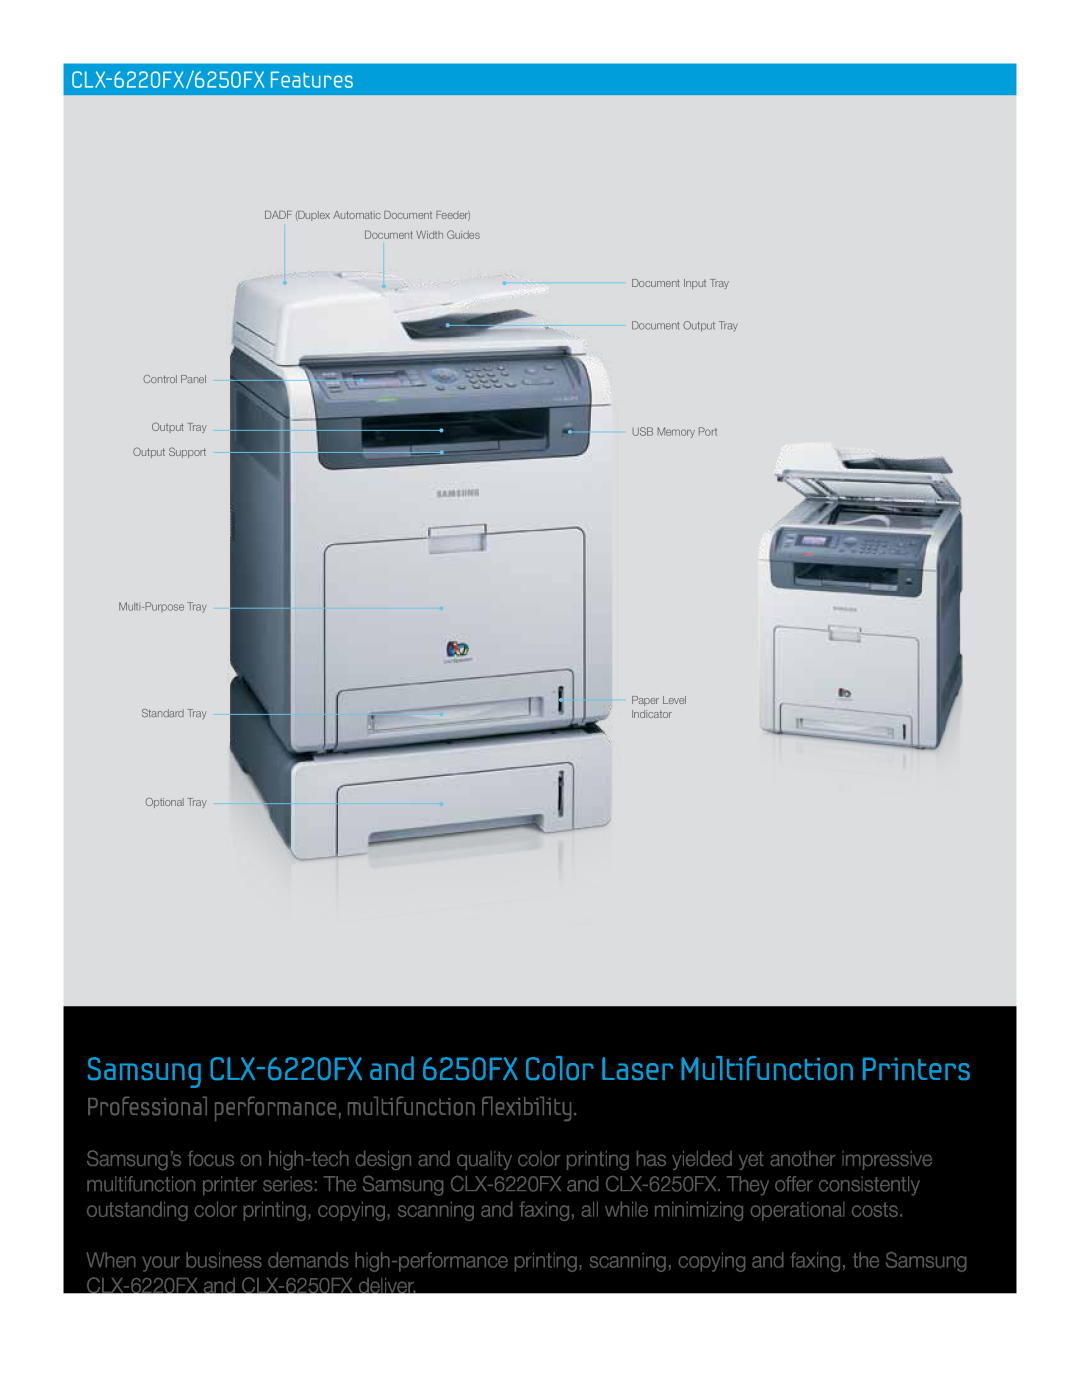 Samsung CLX-6250FX manual CLX-6220FX/6250FX Features, Samsung CLX-6220FX and 6250FX Color Laser Multifunction Printers 